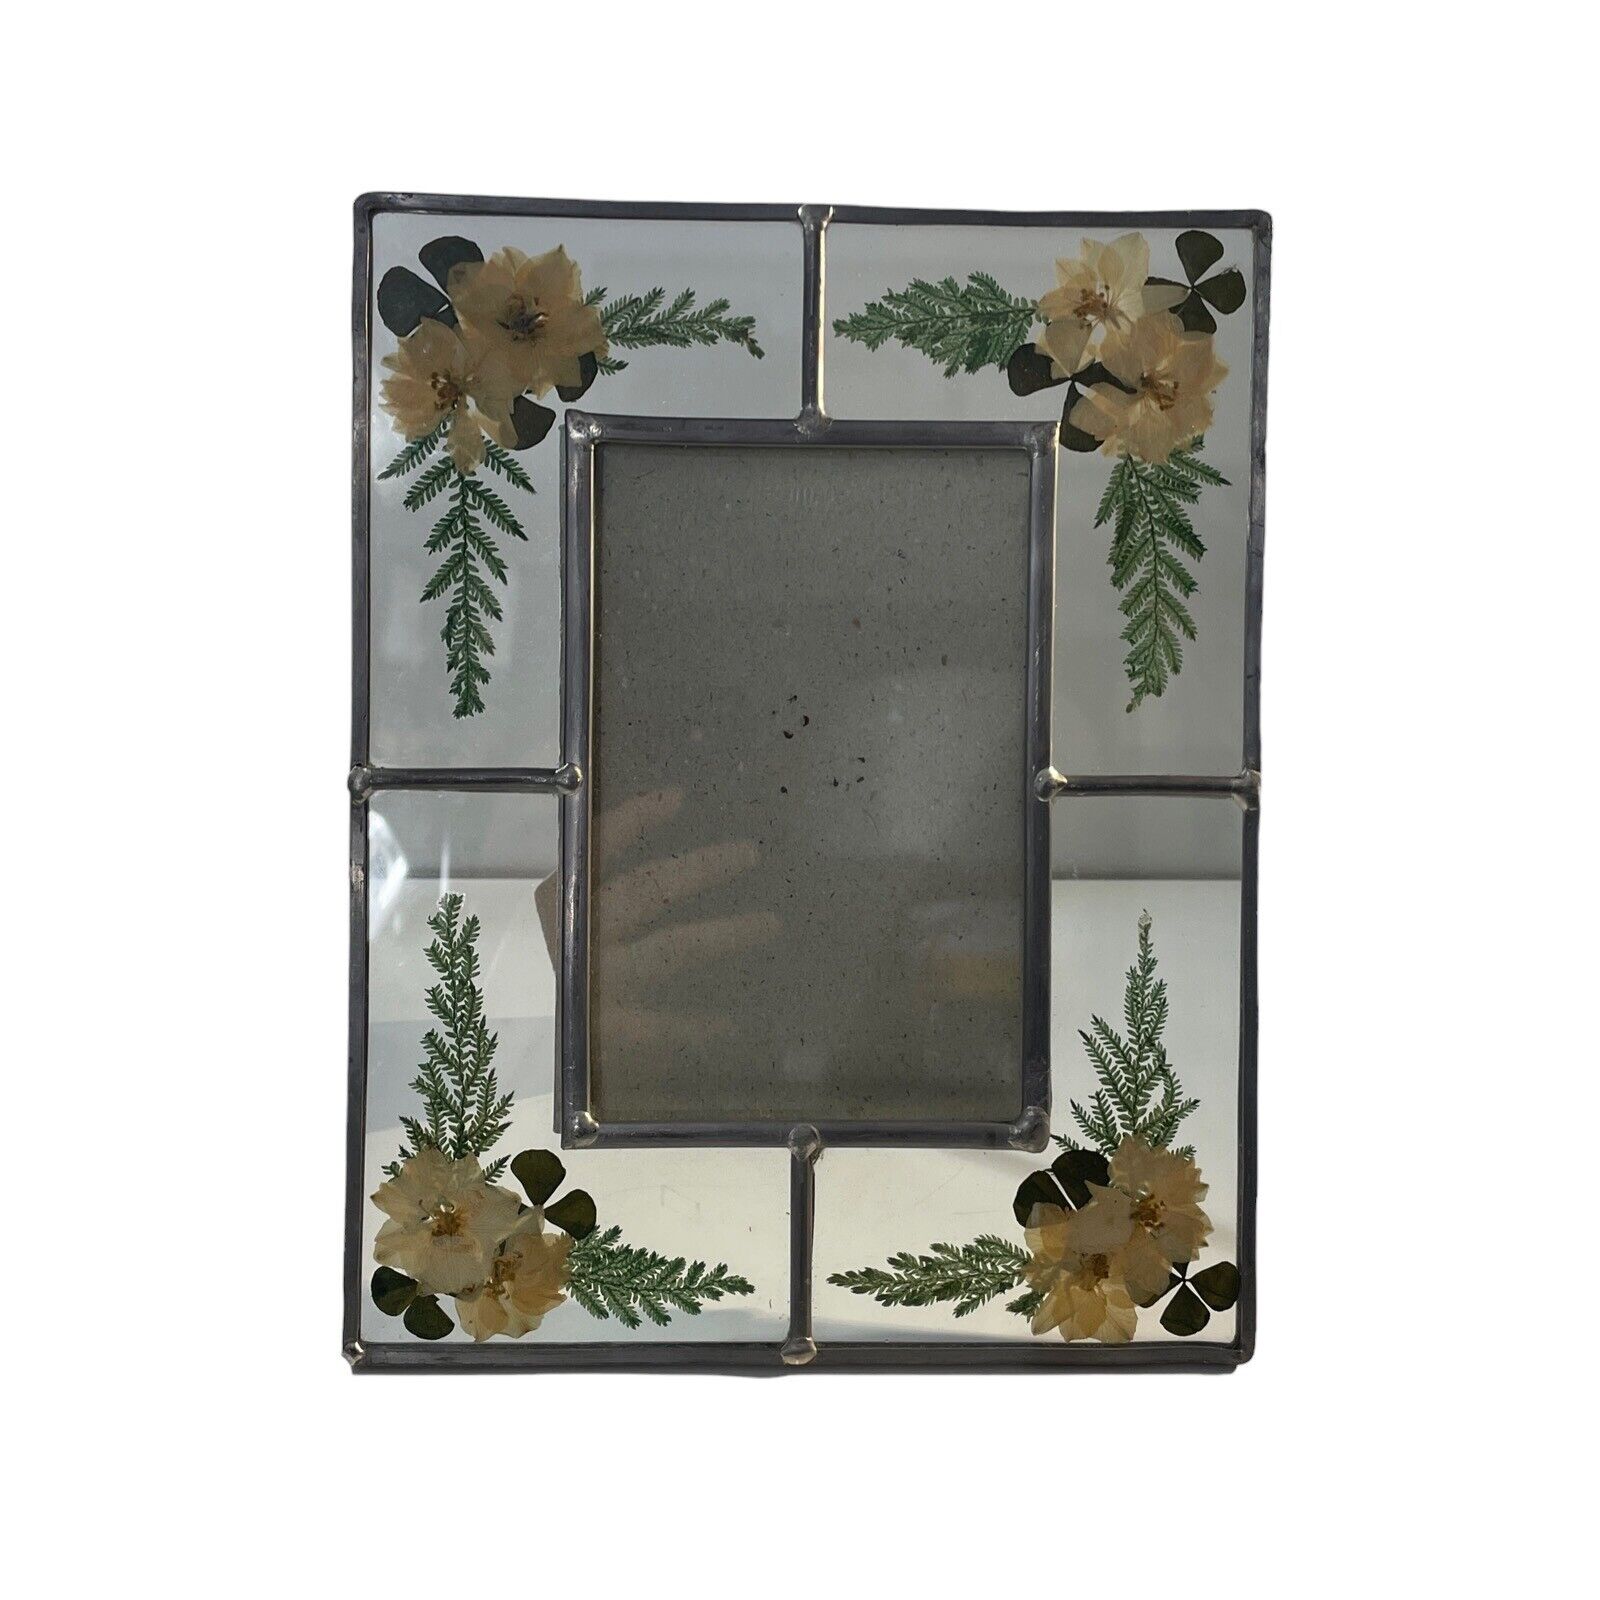 Dried Pressed White Flowers Glass Photo Frame Leaded VTG Free Standing